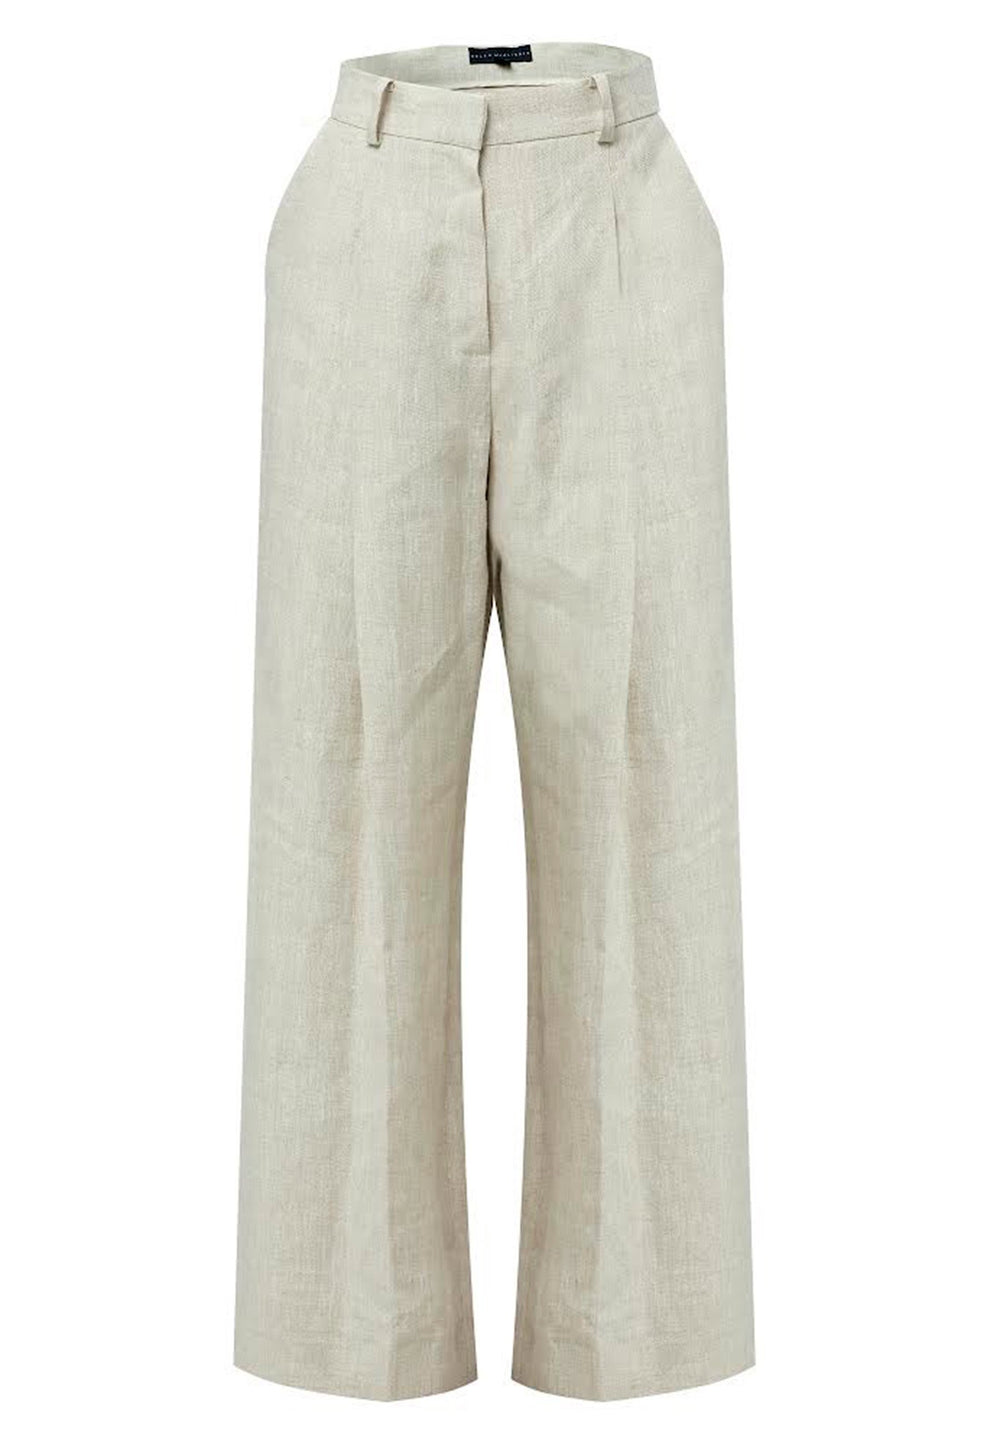 Meet the Lyra Oatmeal Linen Trousers, a stylish and relaxed choice for your wardrobe. With a wide-leg design and pleat front, they blend comfort with sophistication. Made from quality oatmeal linen, these versatile trousers can be dressed up or down for any occasion. Pair with a simple top and casual shoes for a chic, contemporary look that stands out.